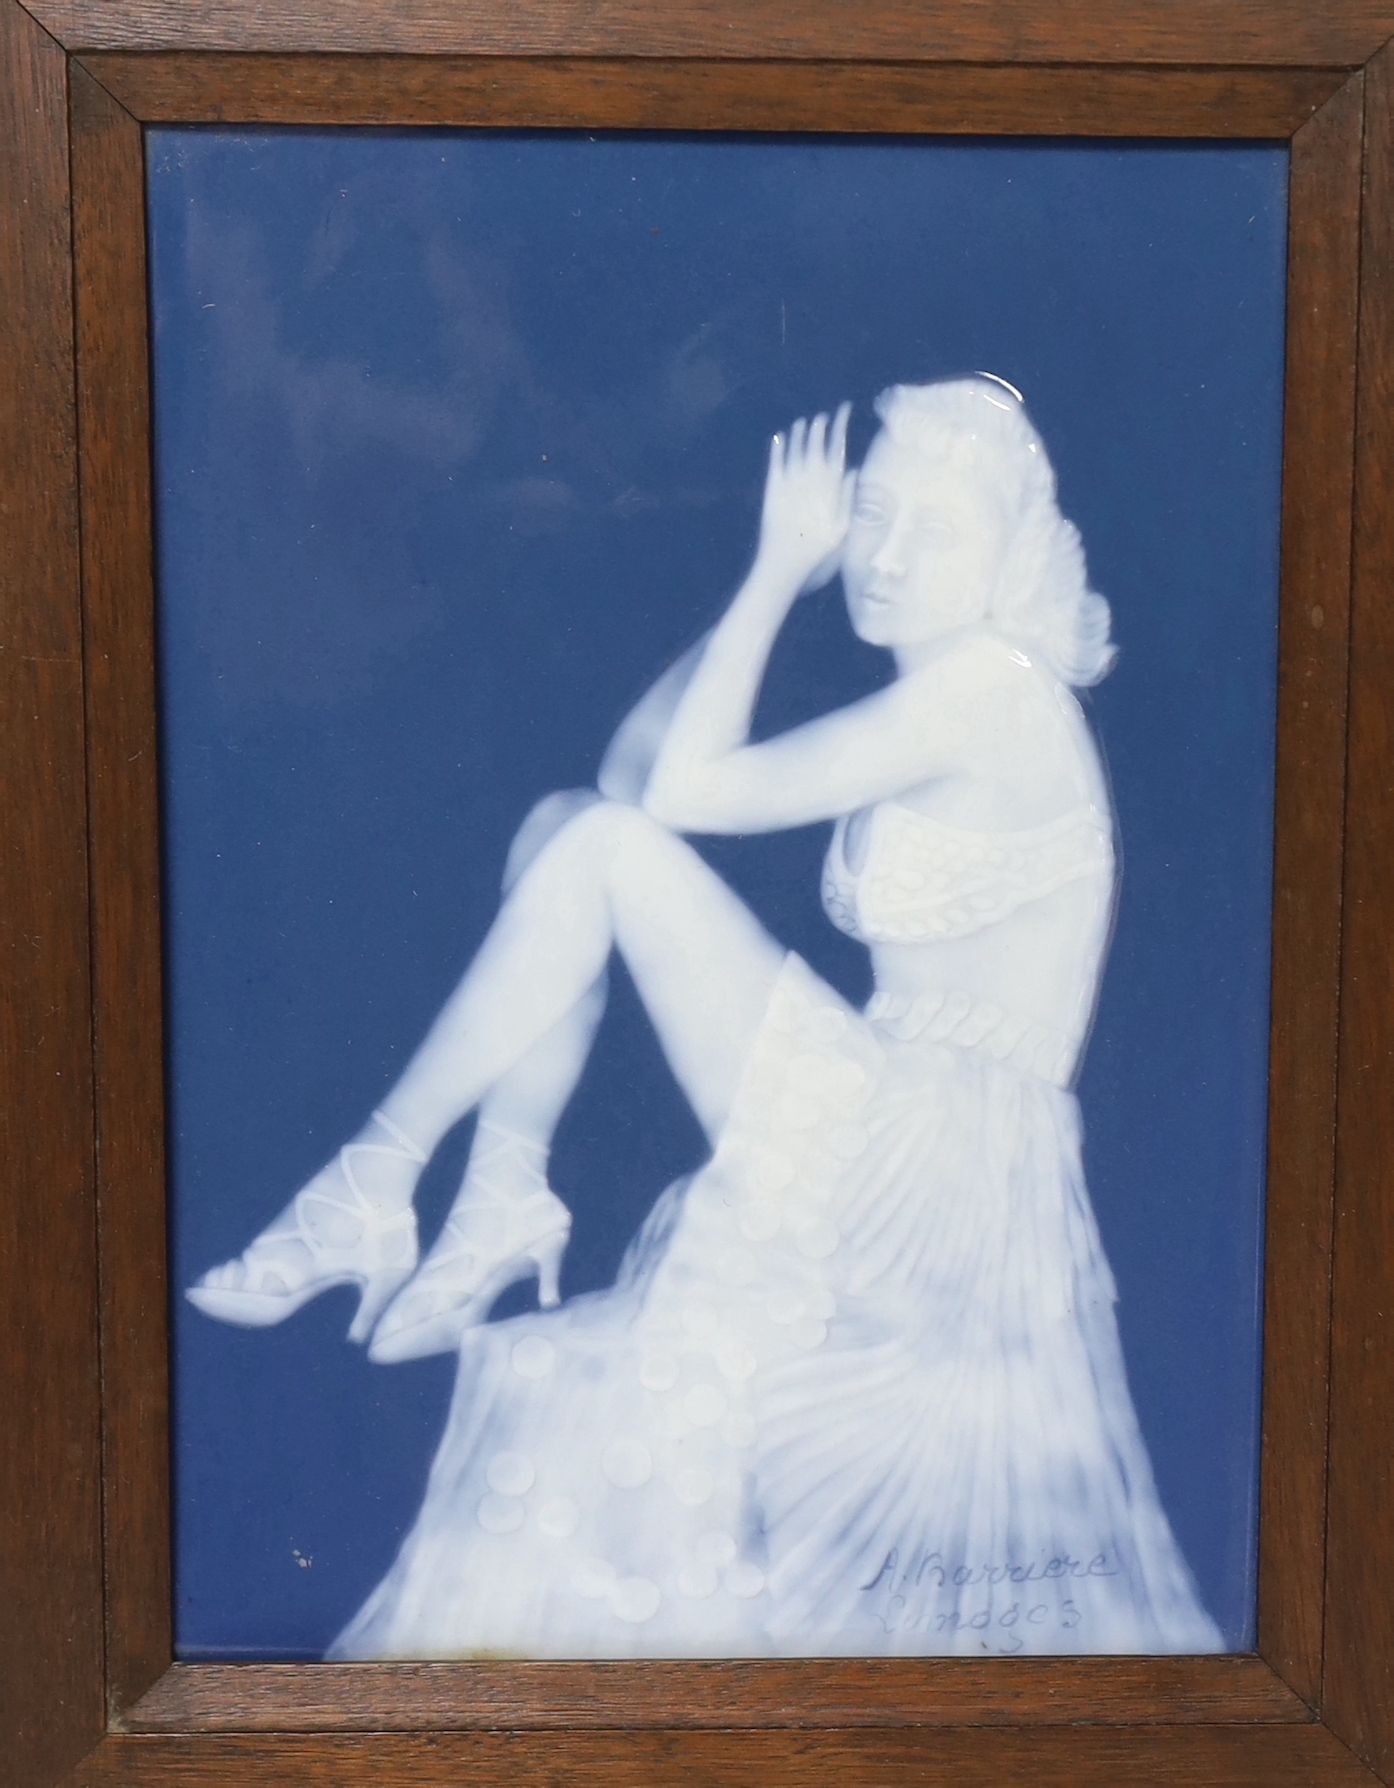 An Art Deco Limoges pate sur pate plaque depicting a seated female, signed, A Barriere, framed, overall 39 x 33cm